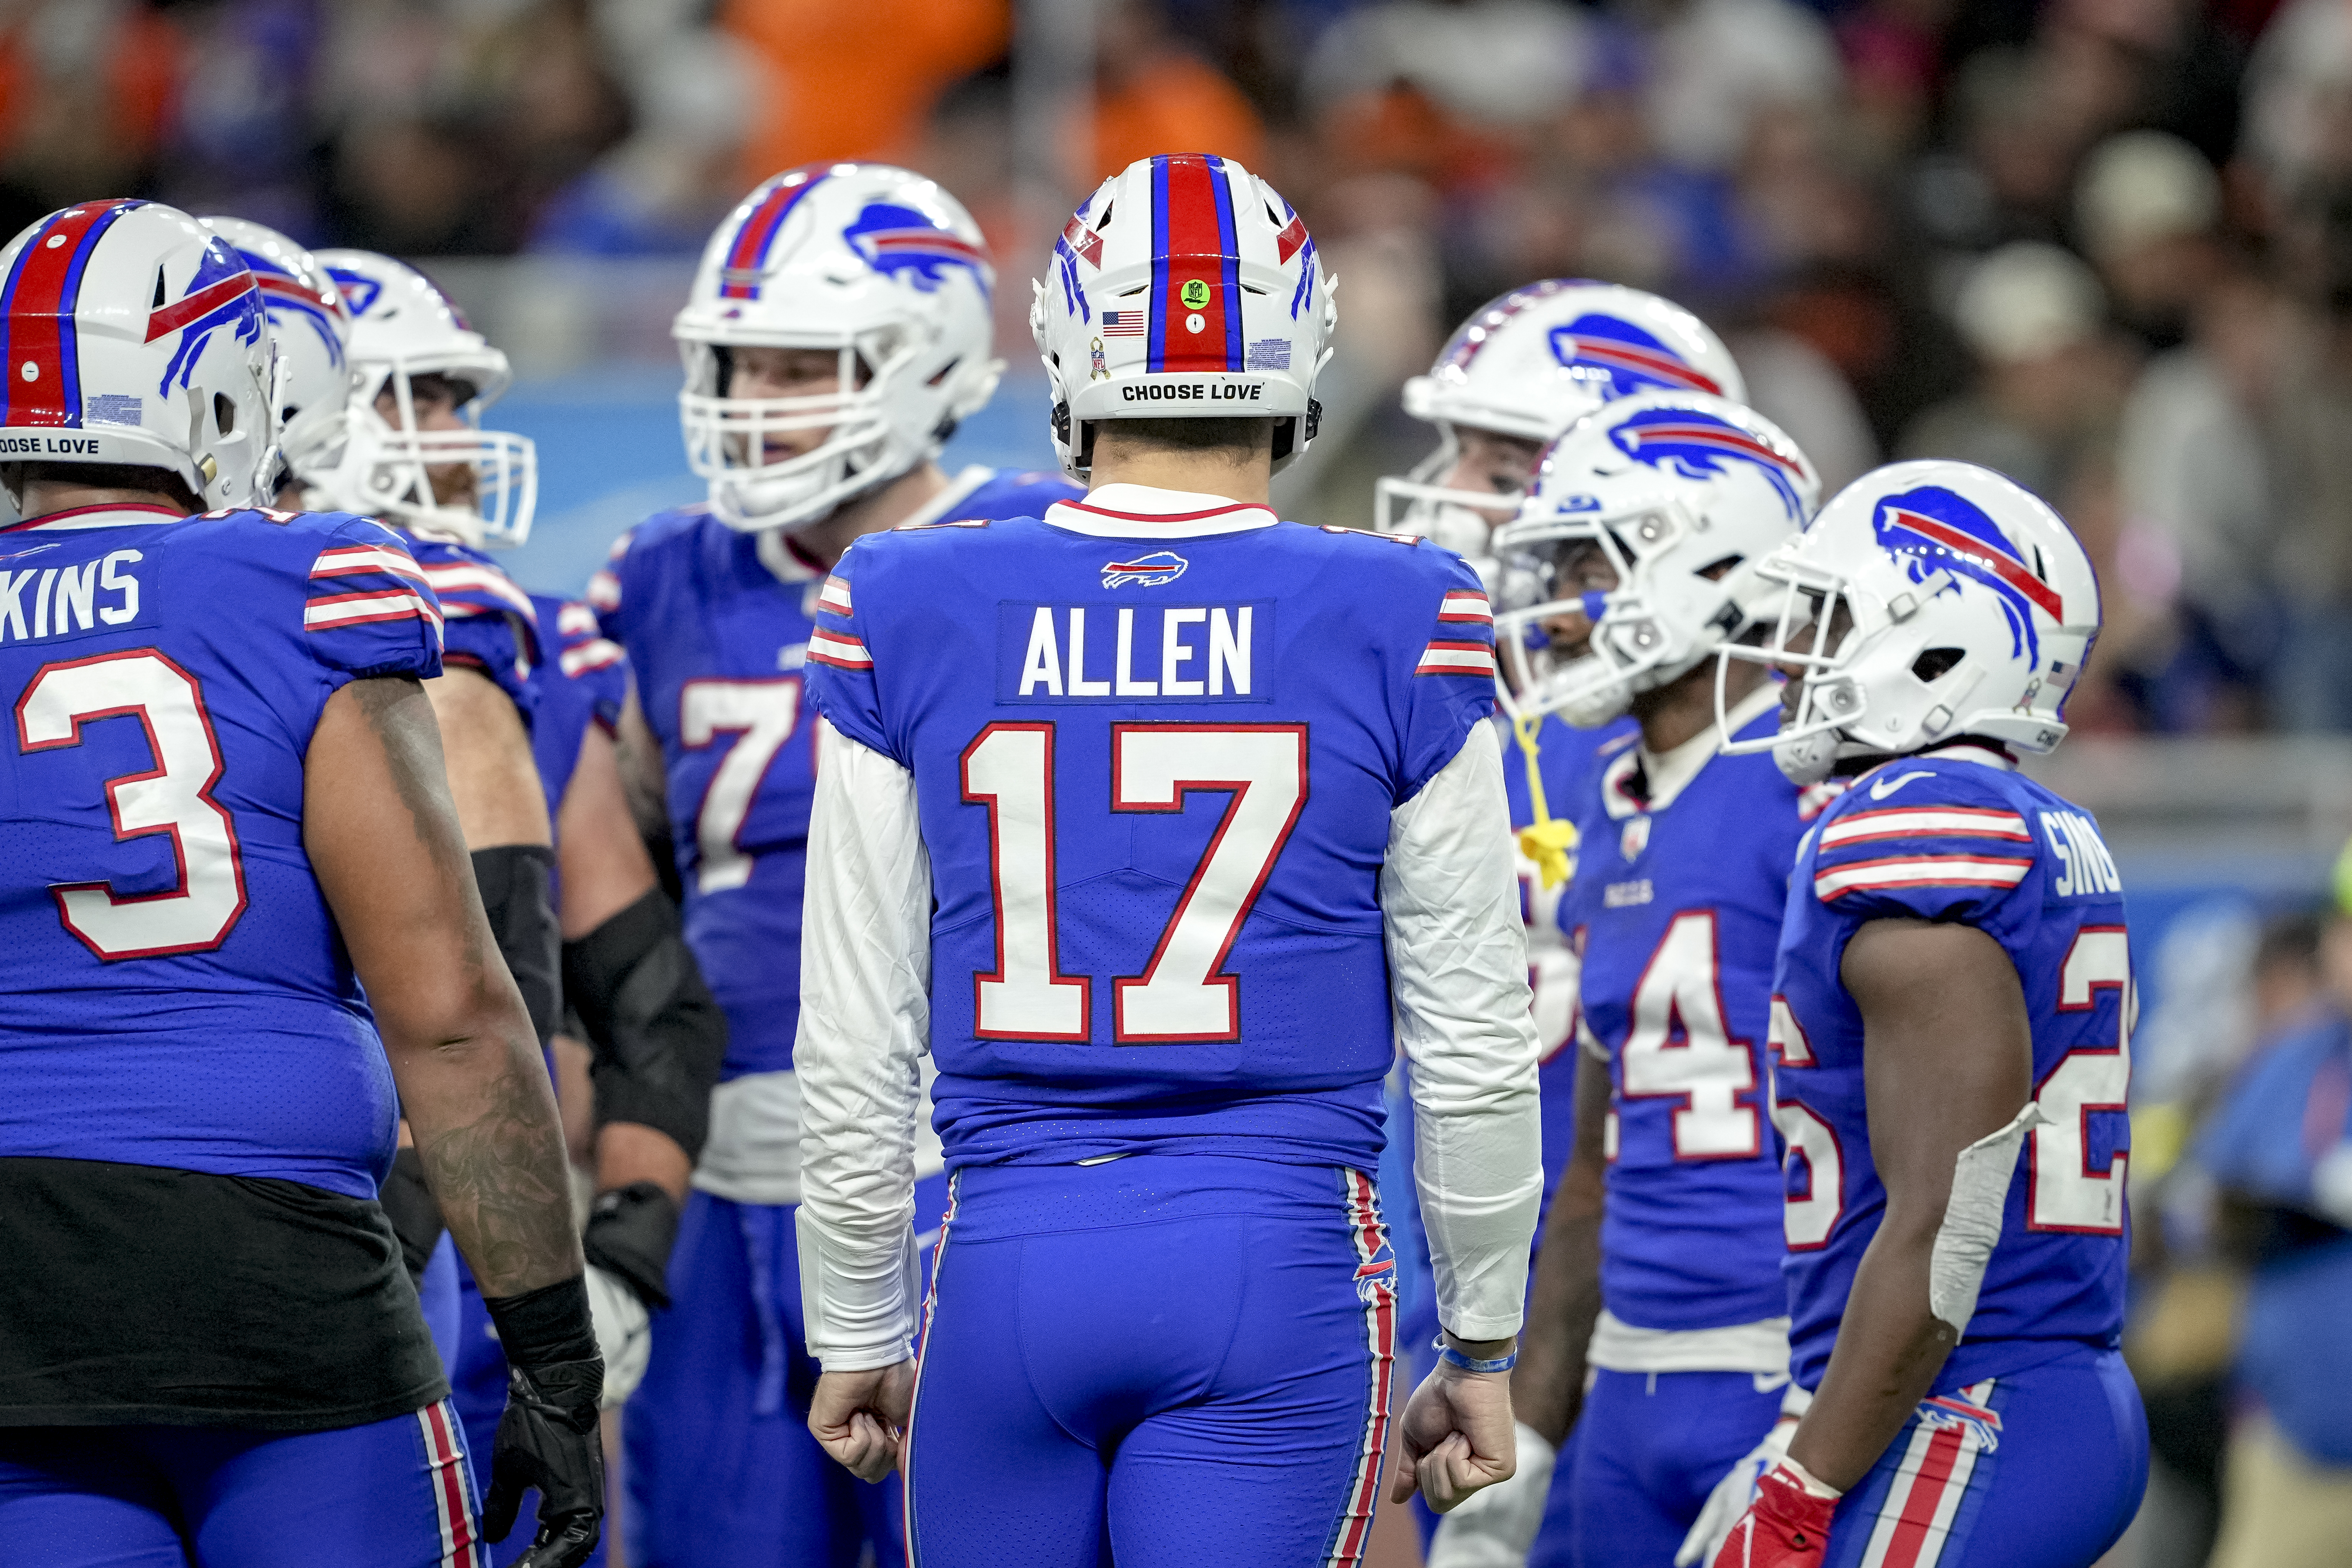 Josh Allen #17 of the Buffalo Bills speaks with his team in a huddle against the Cleveland Browns at Ford Field on November 20, 2022 in Detroit, Michigan.